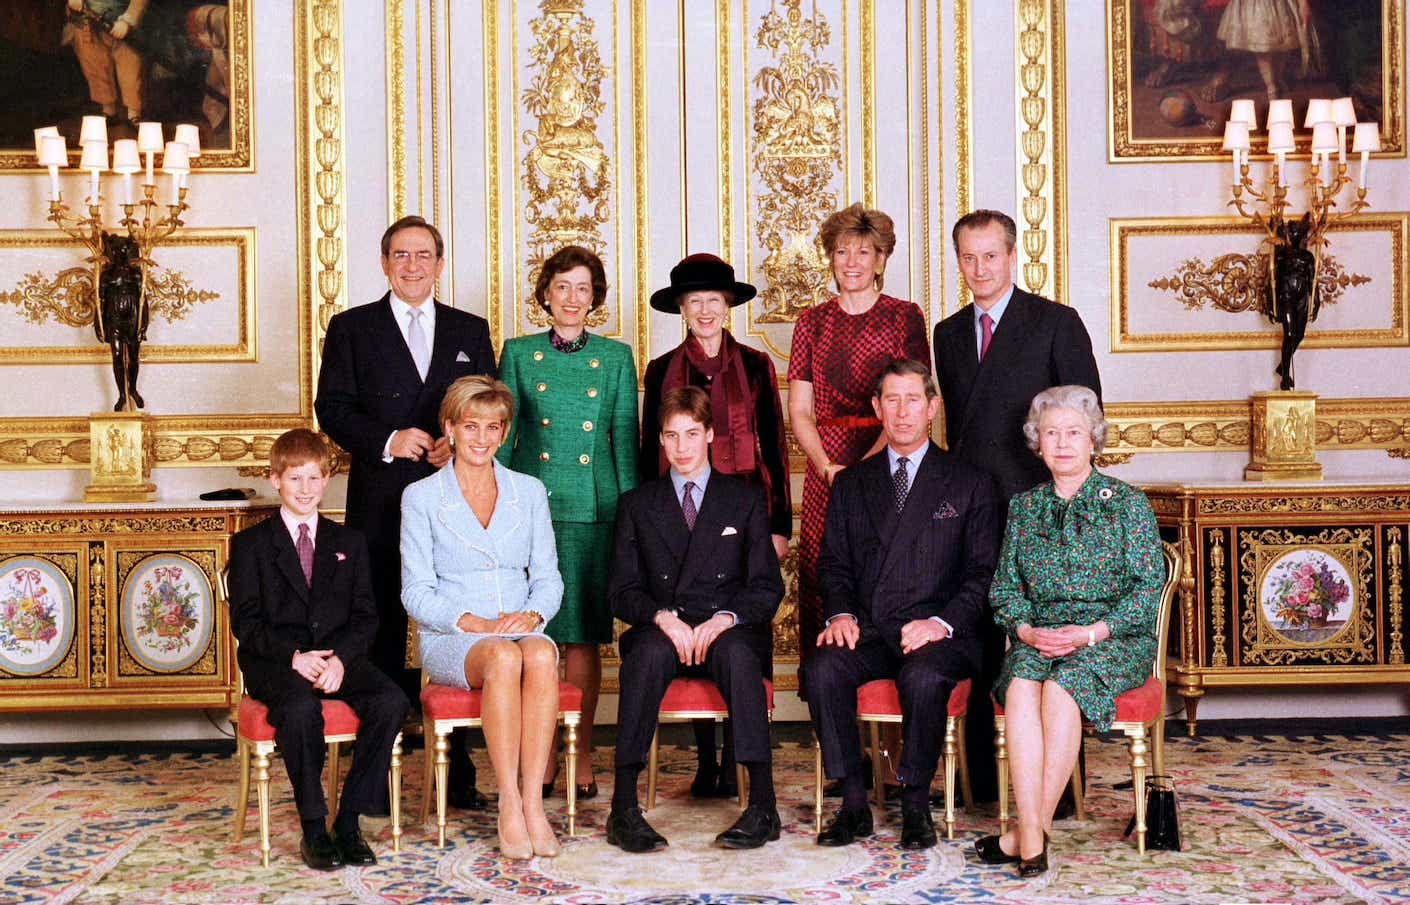 The official portrait Of The Royal Family on The day Of Prince William's confirmation At Windsor Castle in 1997.